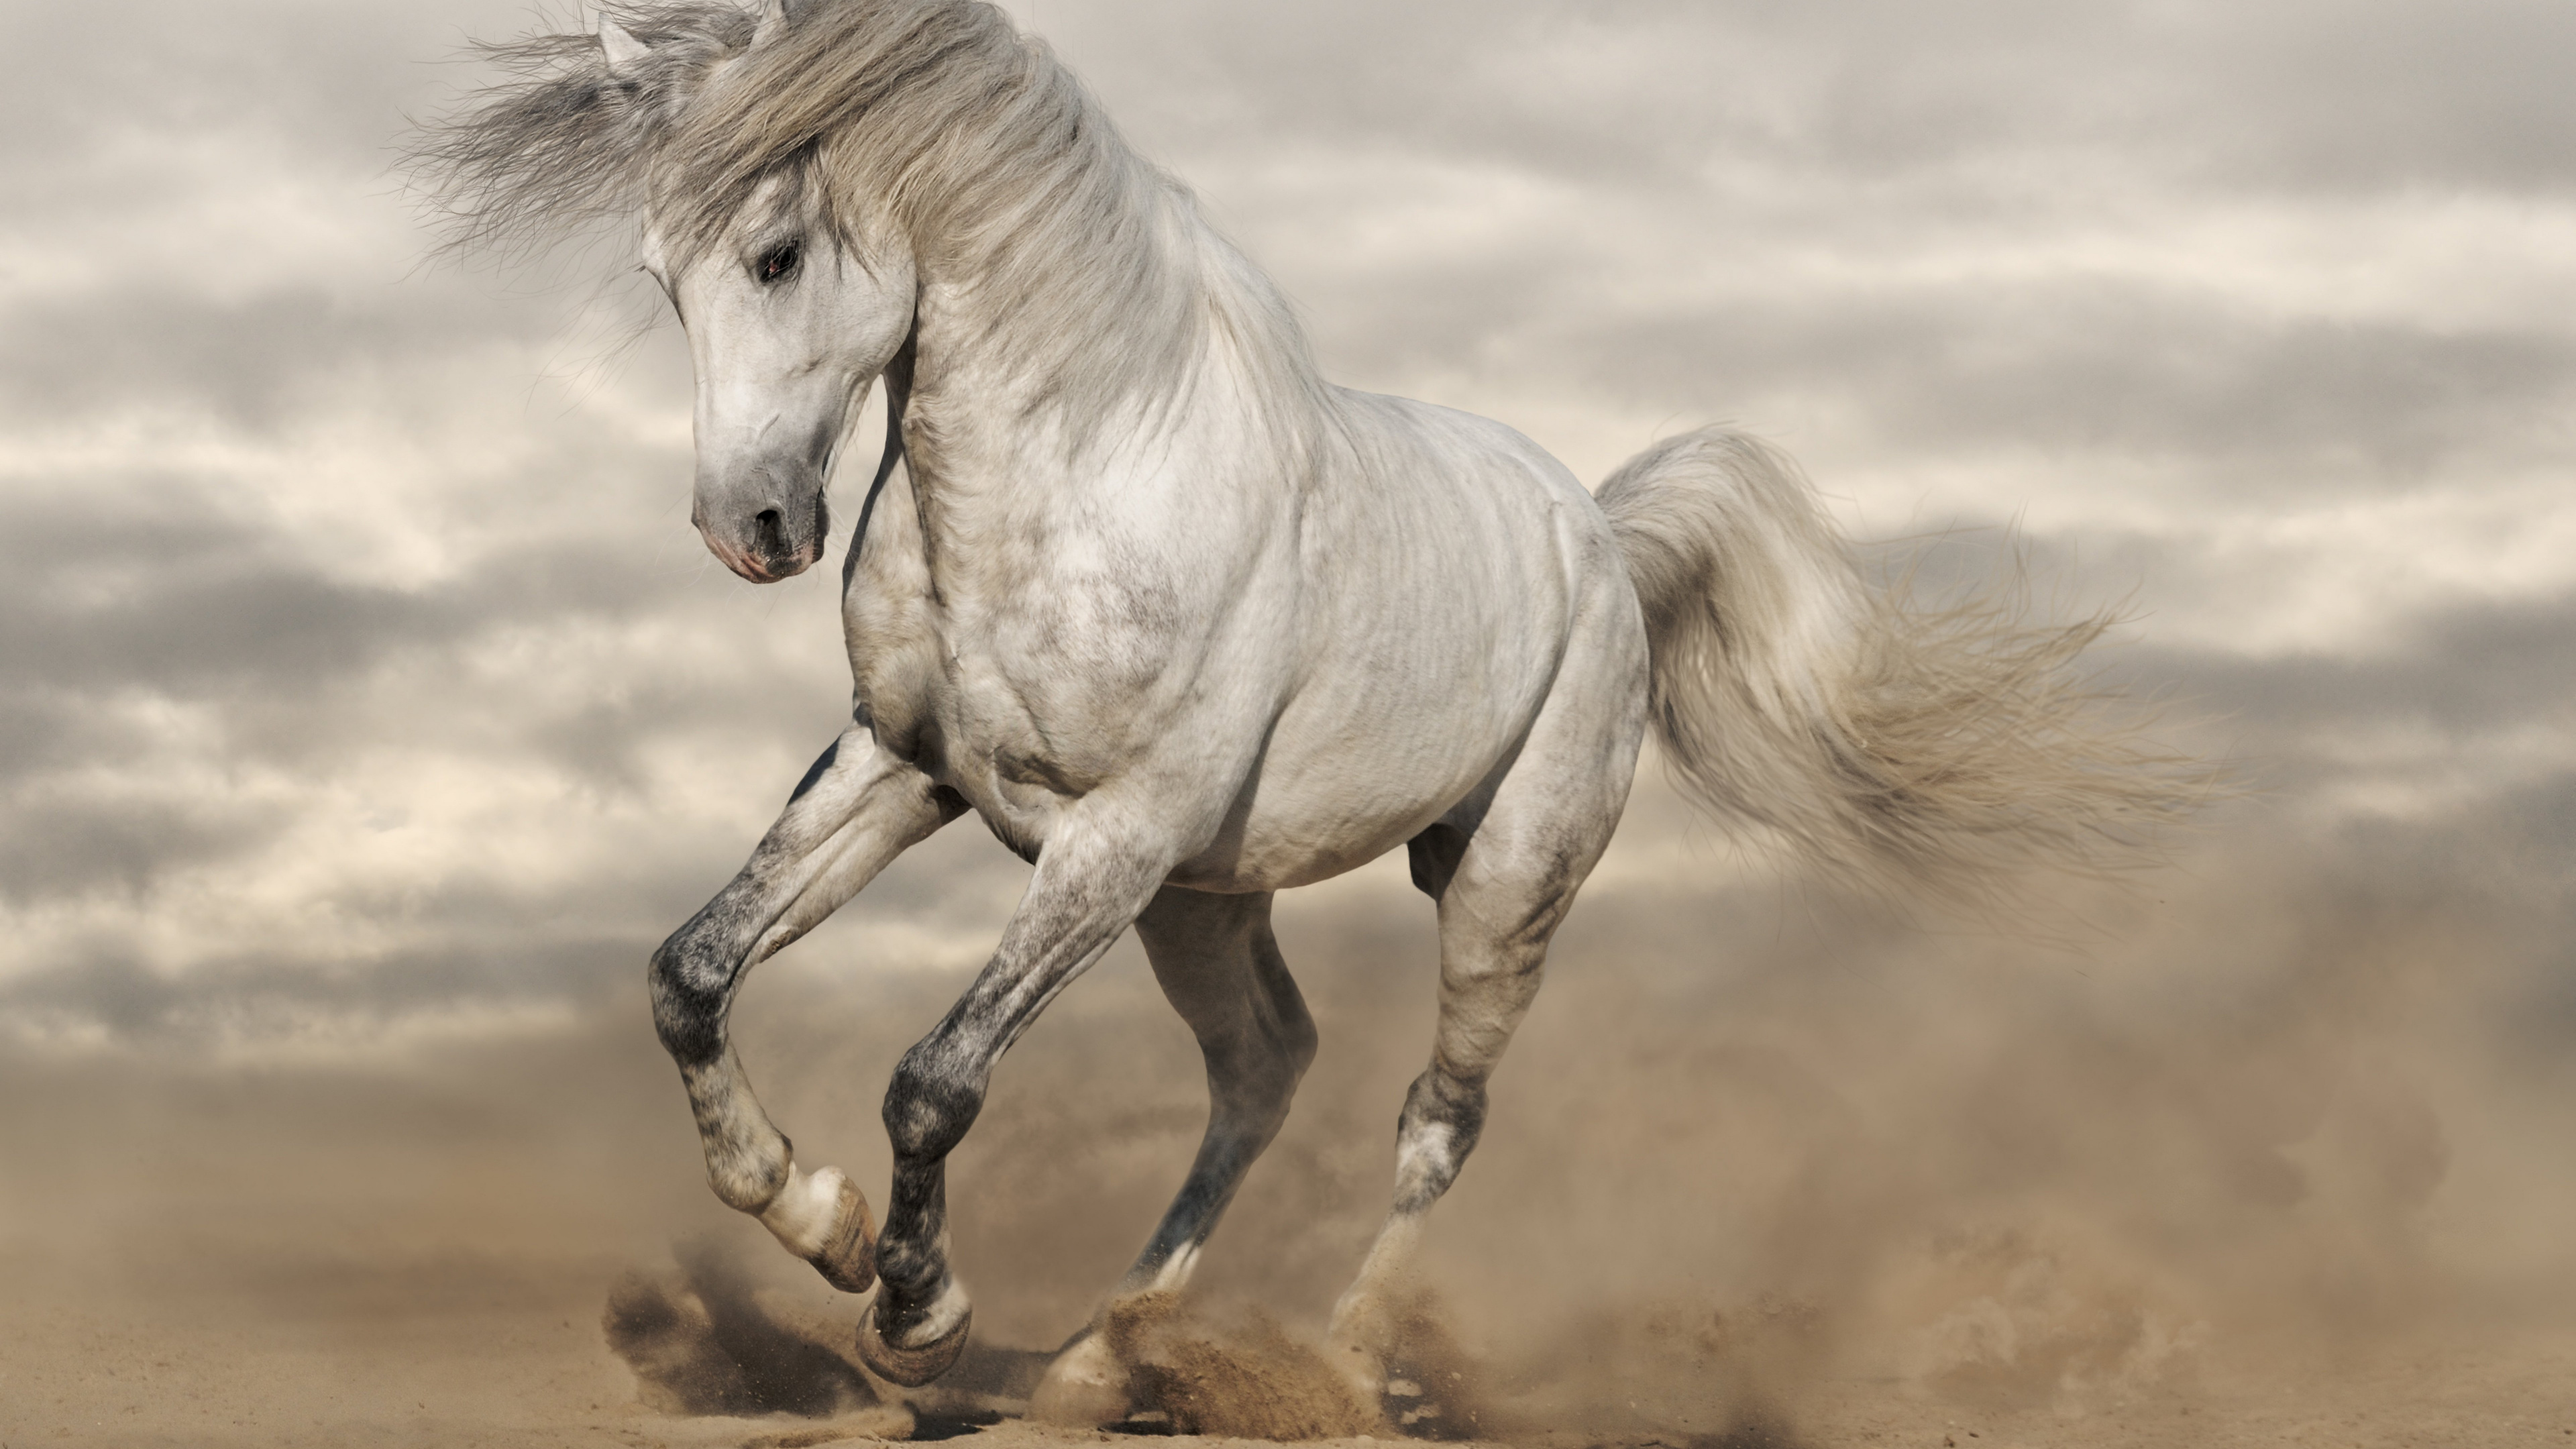 White Horse Running on Brown Sand During Daytime. Wallpaper in 3840x2160 Resolution